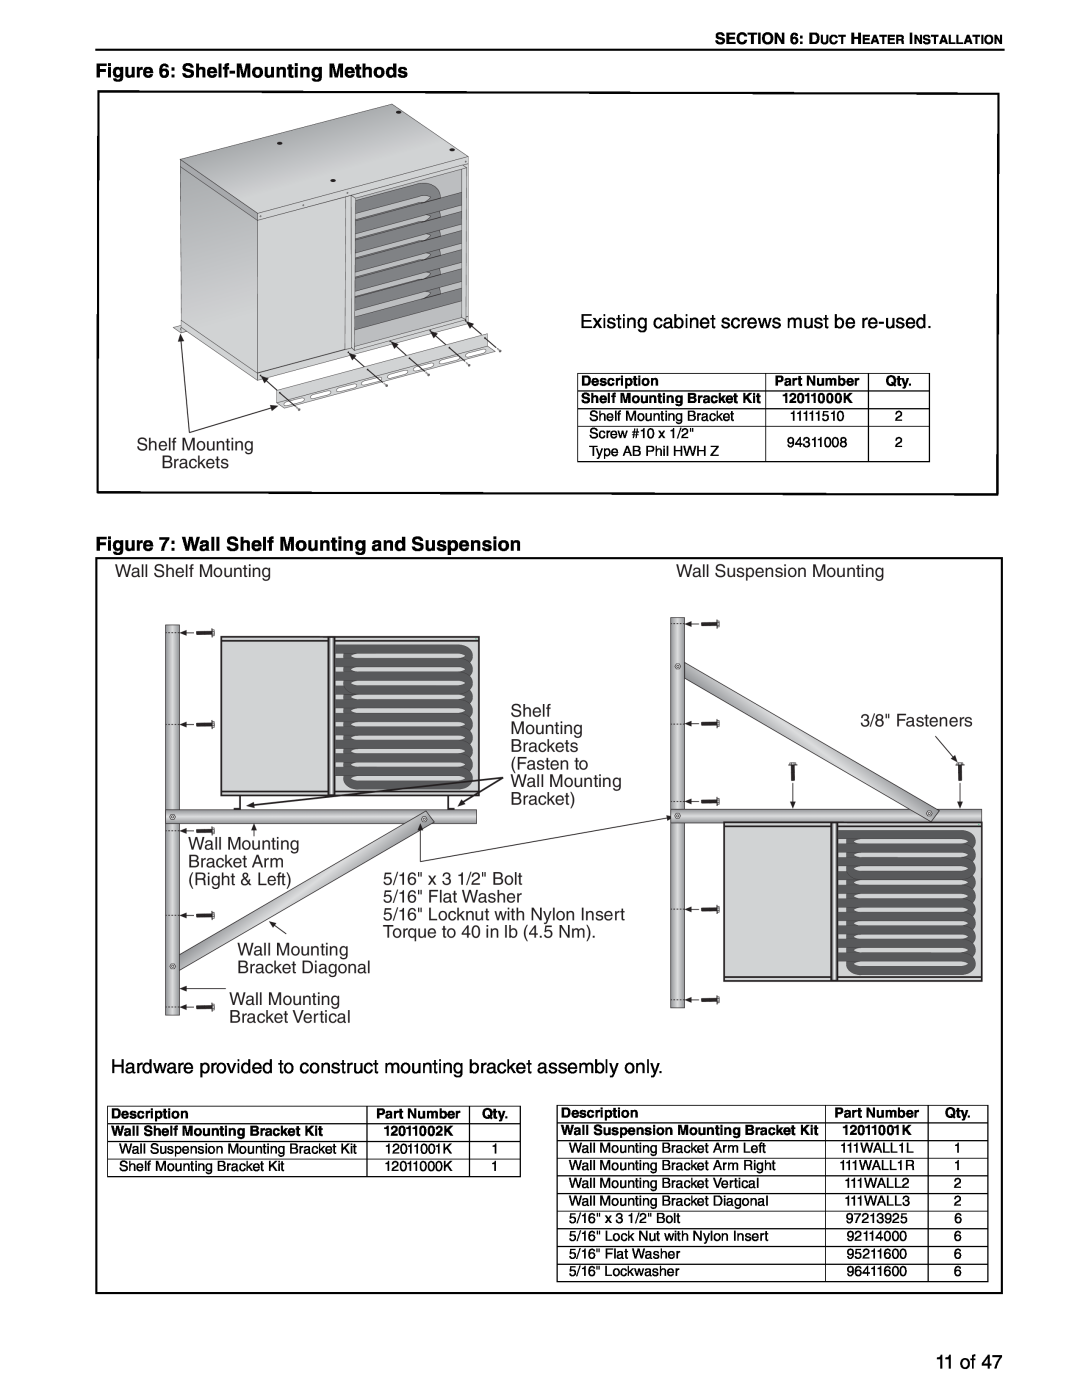 Roberts Gorden 100, 75 Shelf-MountingMethods, Wall Shelf Mounting and Suspension, Existing cabinet screws must be re-used 